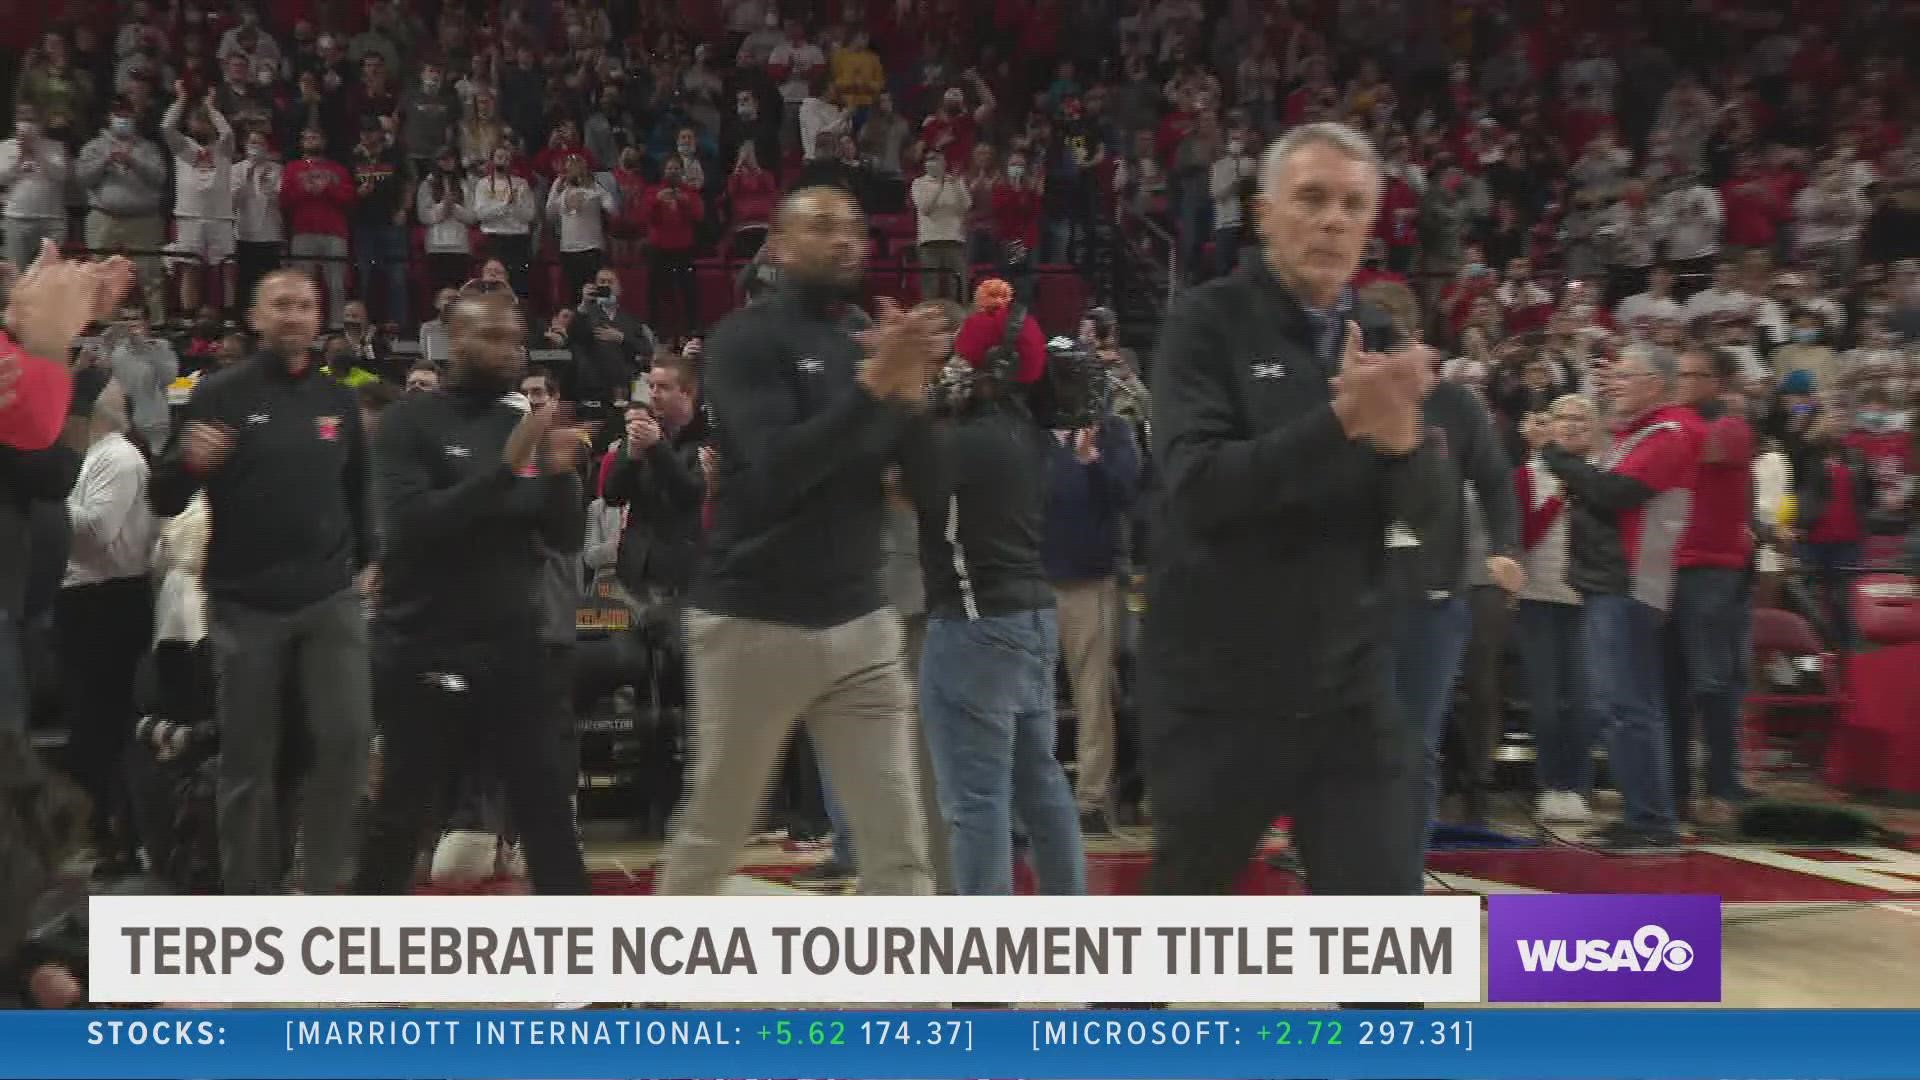 Eleven of the 2002 Maryland men's basketball team celebrate the 20th anniversary of their NCAA tournament title